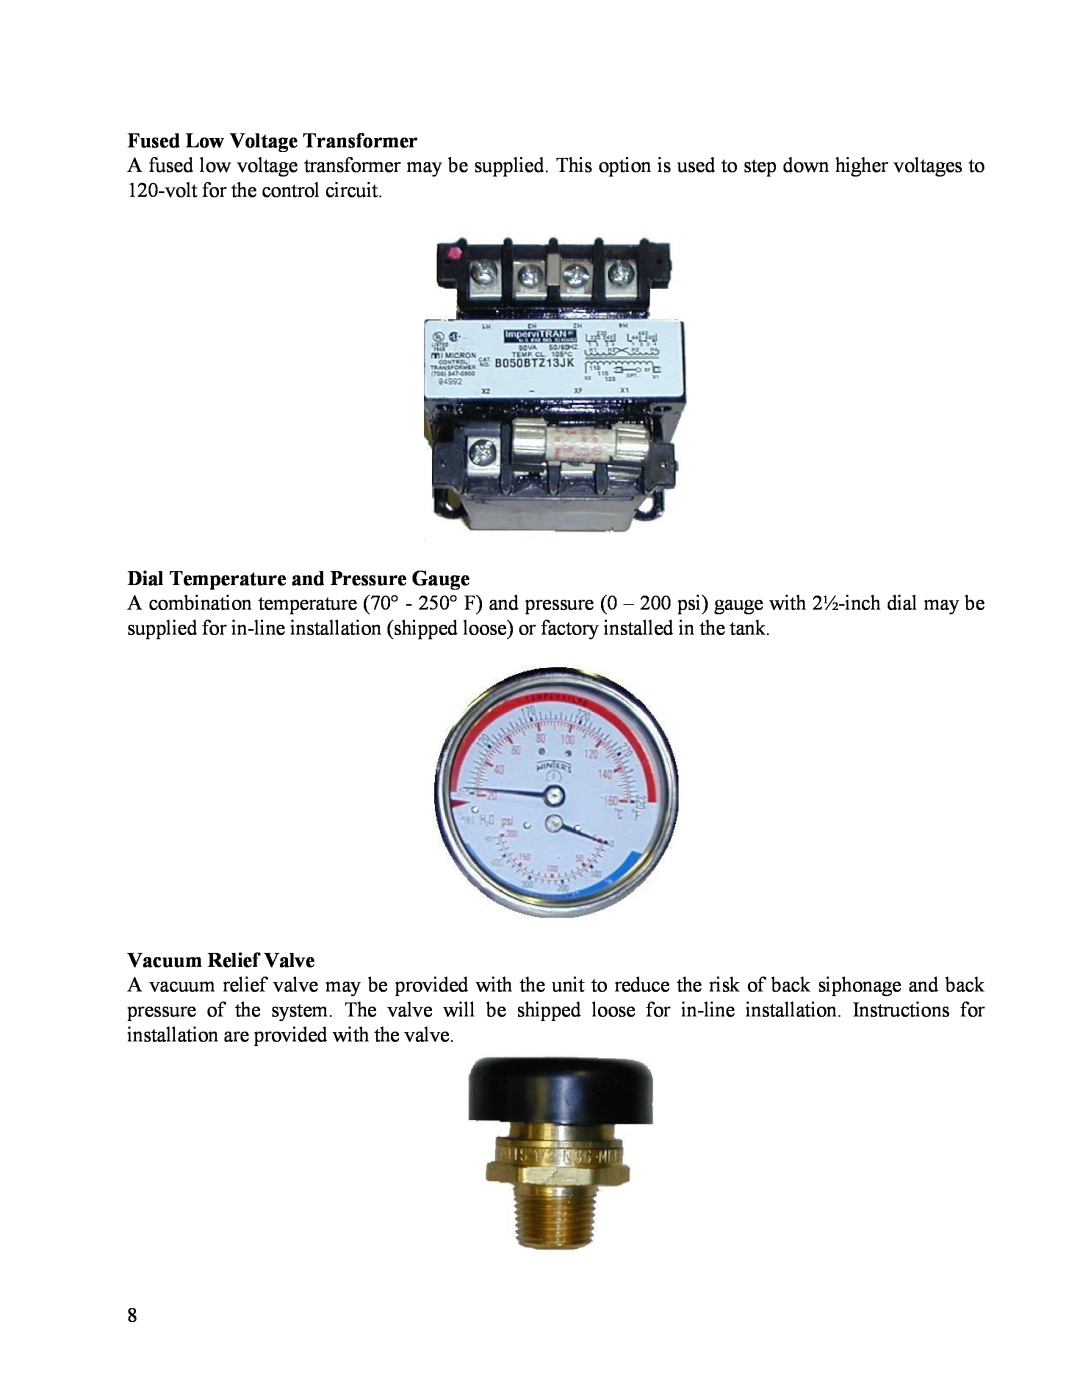 Hubbell Electric Heater Company SE Fused Low Voltage Transformer, Dial Temperature and Pressure Gauge, Vacuum Relief Valve 